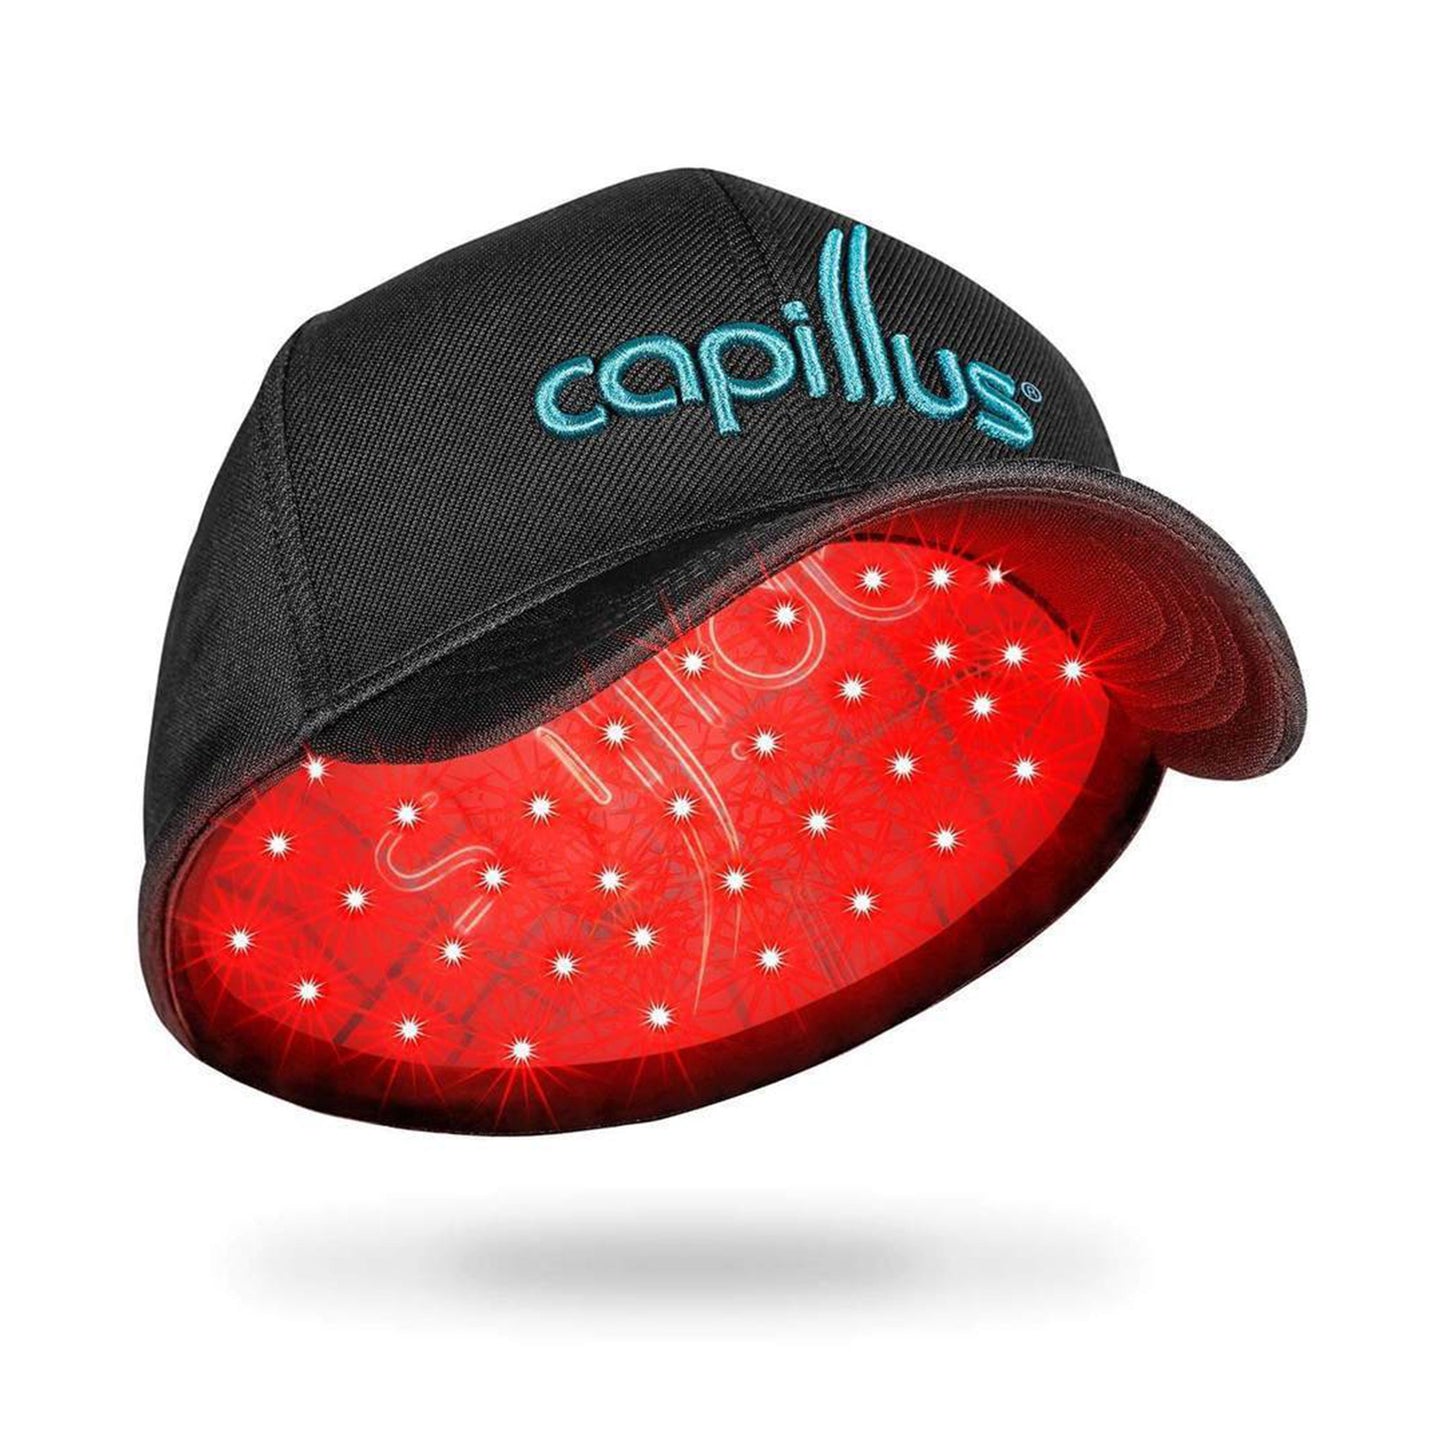 CapillusUltra (82 Diode) Hair Regrowth Laser Cap | Laser Device - Hair Club